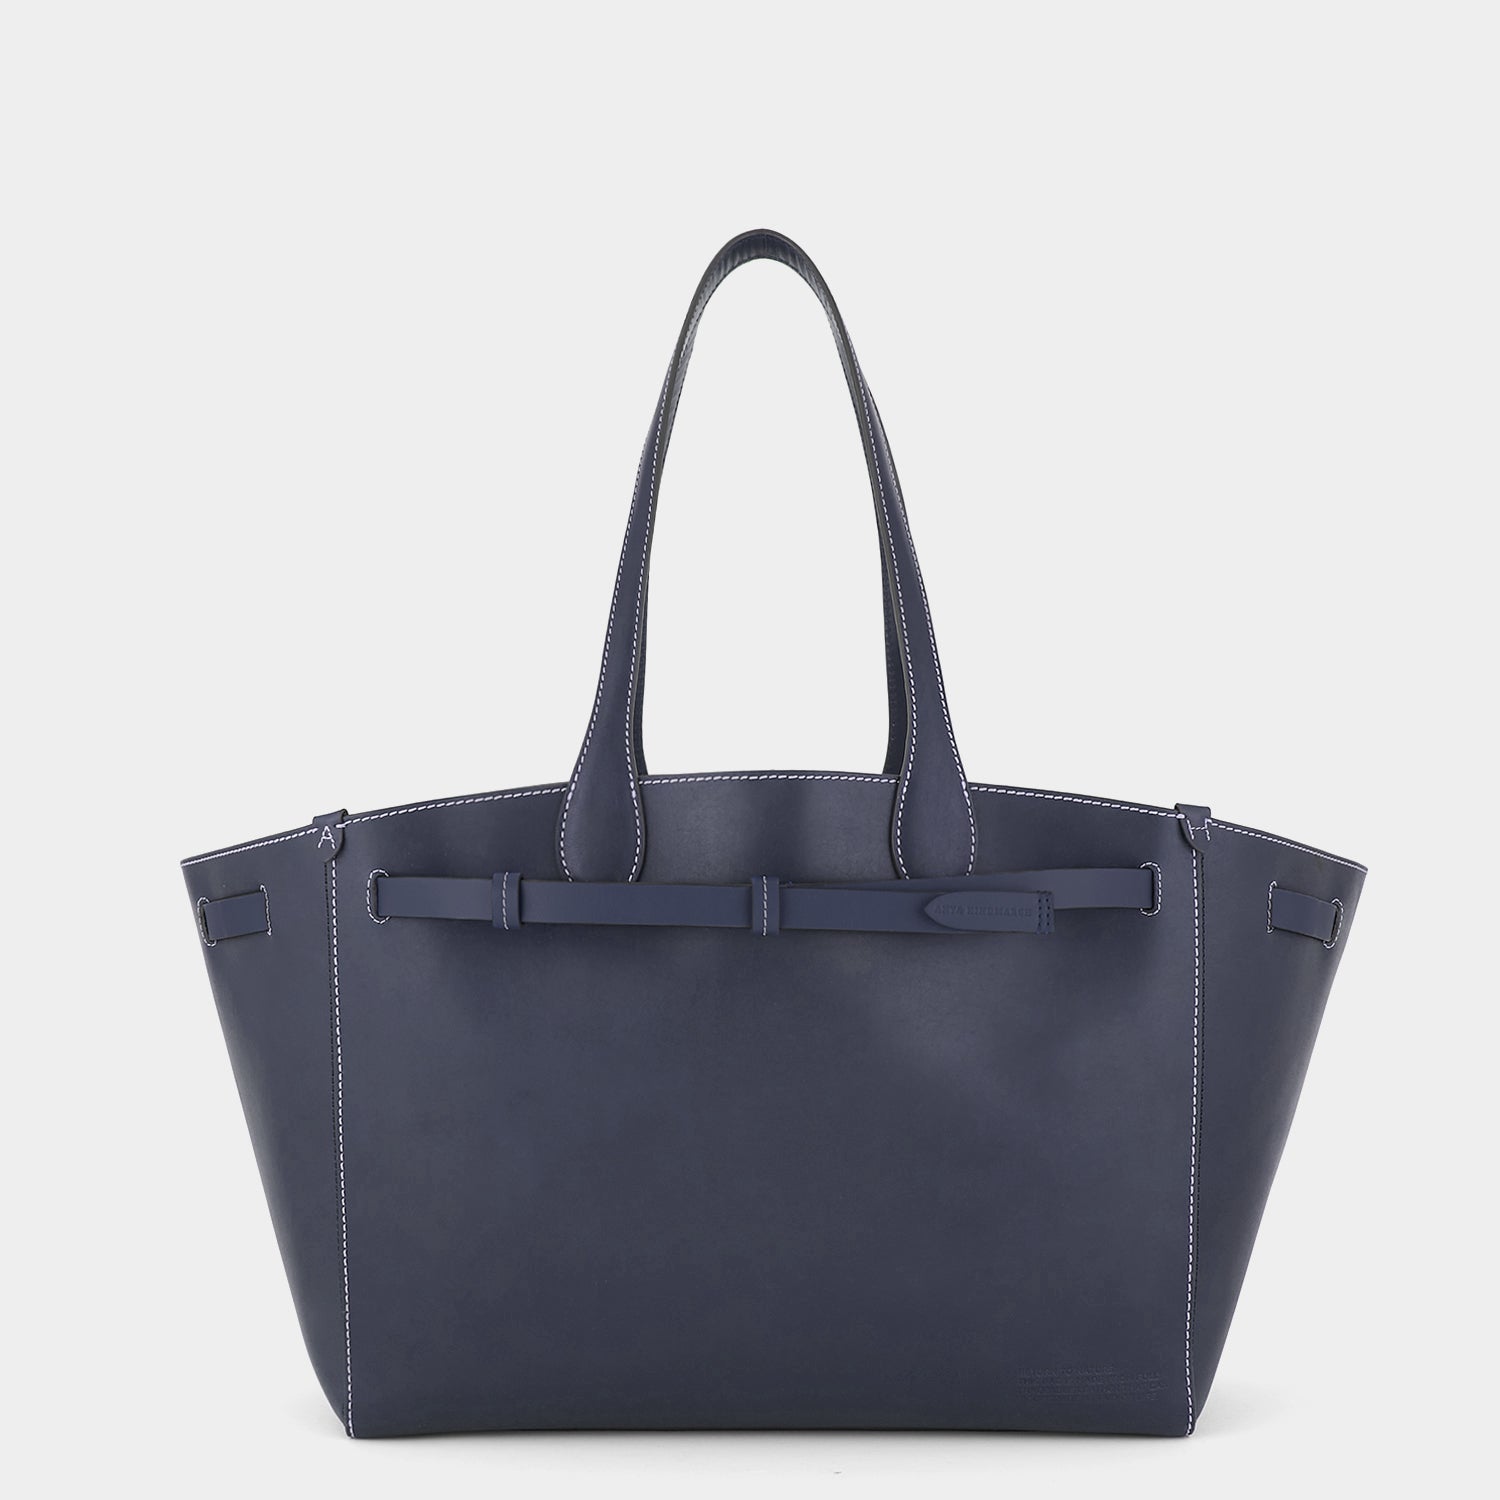 Return to Nature Tote -

                  
                    Compostable Leather in Marine -
                  

                  Anya Hindmarch UK
